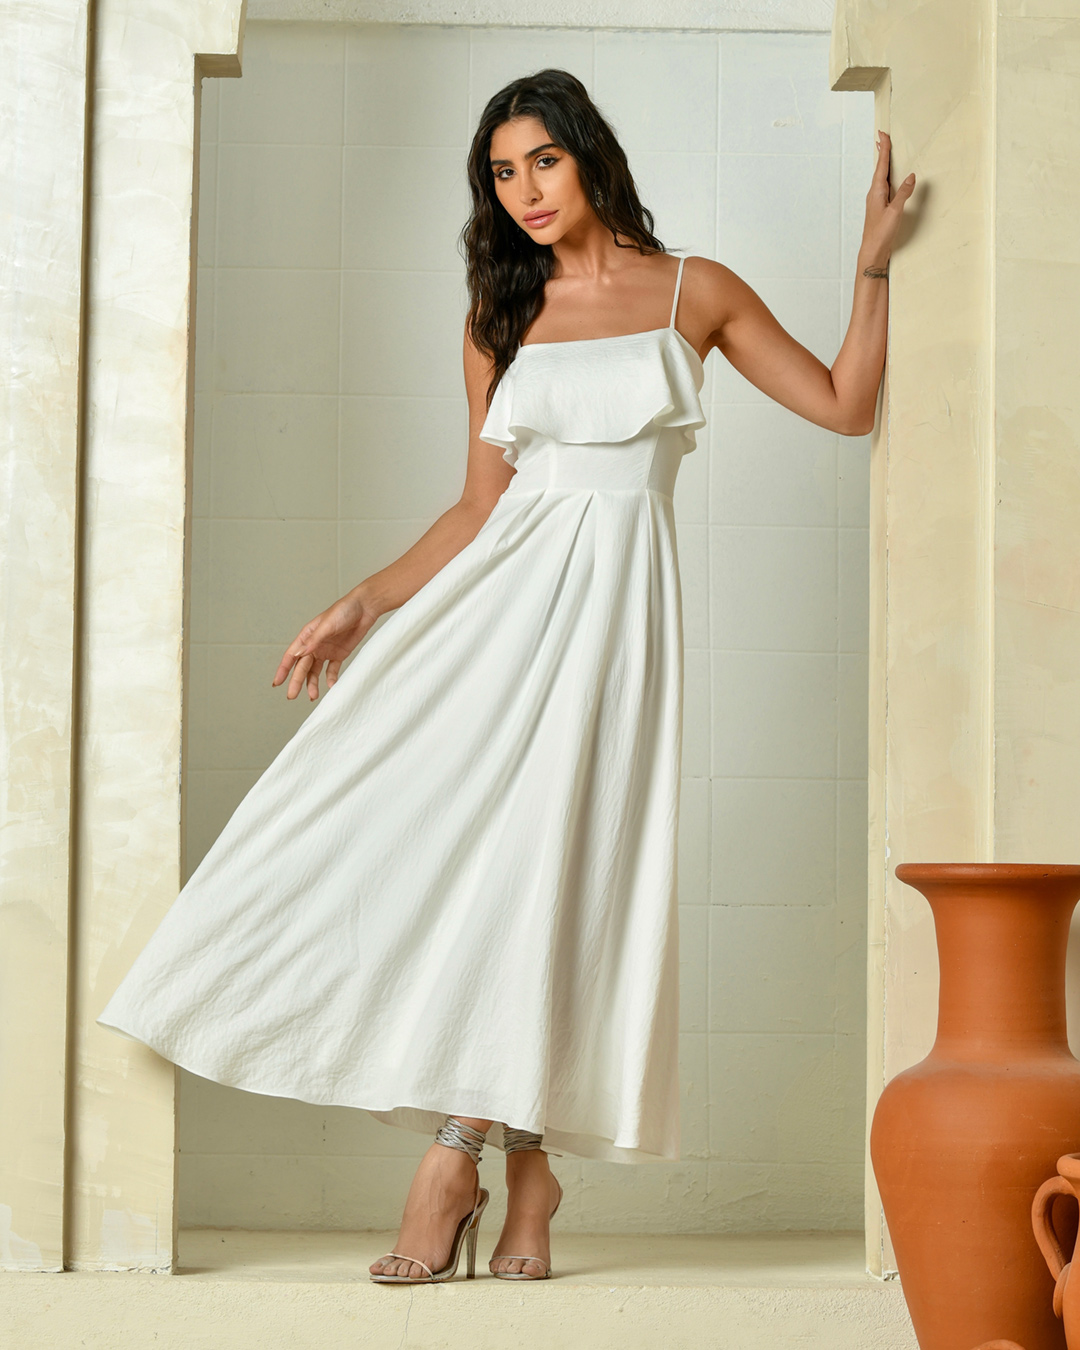 Dot Clothing - Dress Dot Clothing Longuete frill Offwhite - 2143OFF